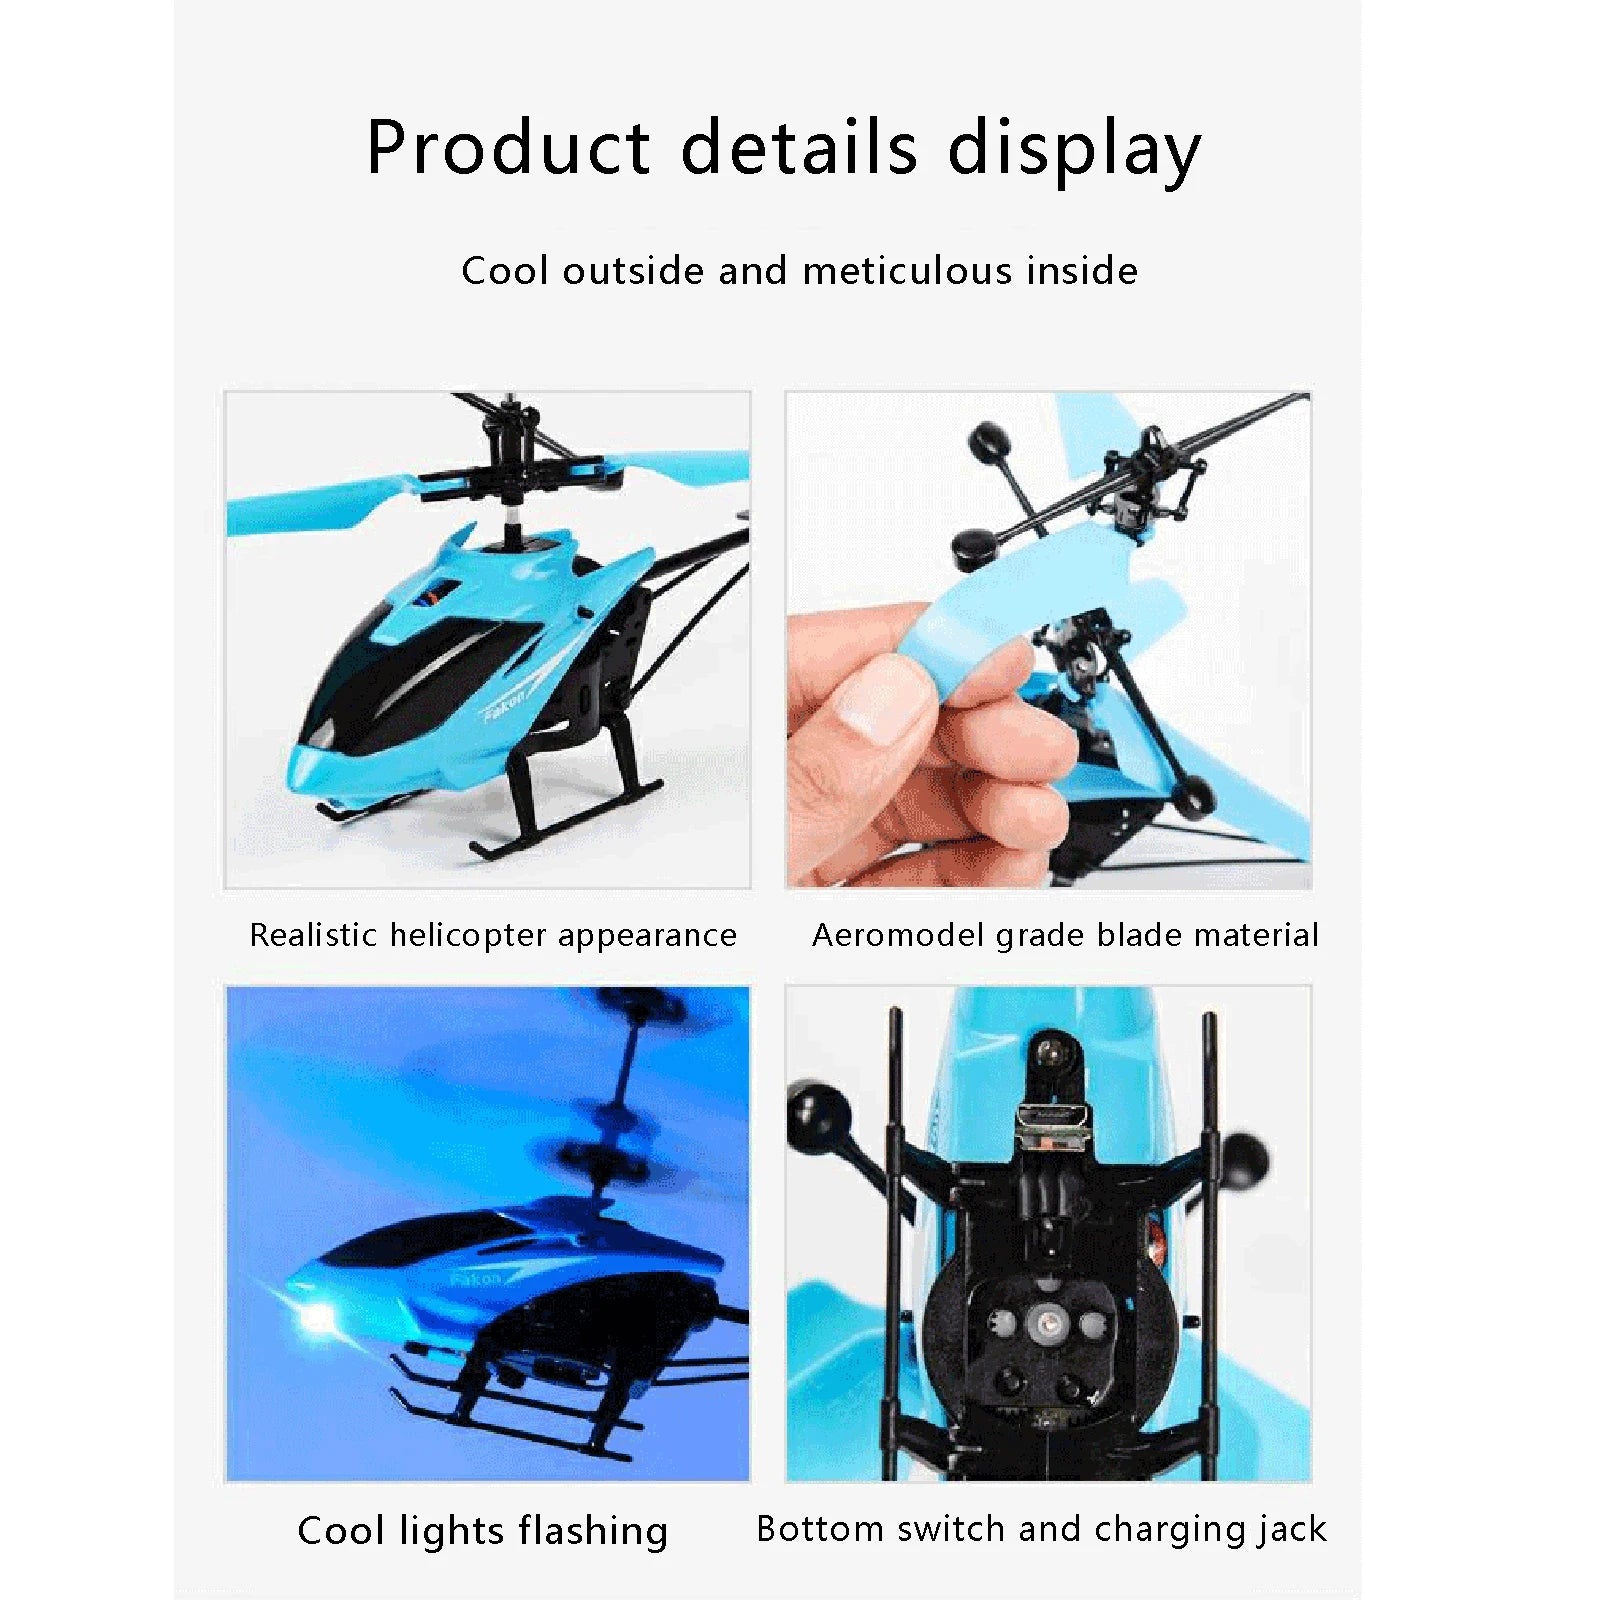 YKF1303 RC Helicopter, Cool outside and meticulous inside Realistic helicopter appearance Aeromodel grade blade material mitot Cool lights